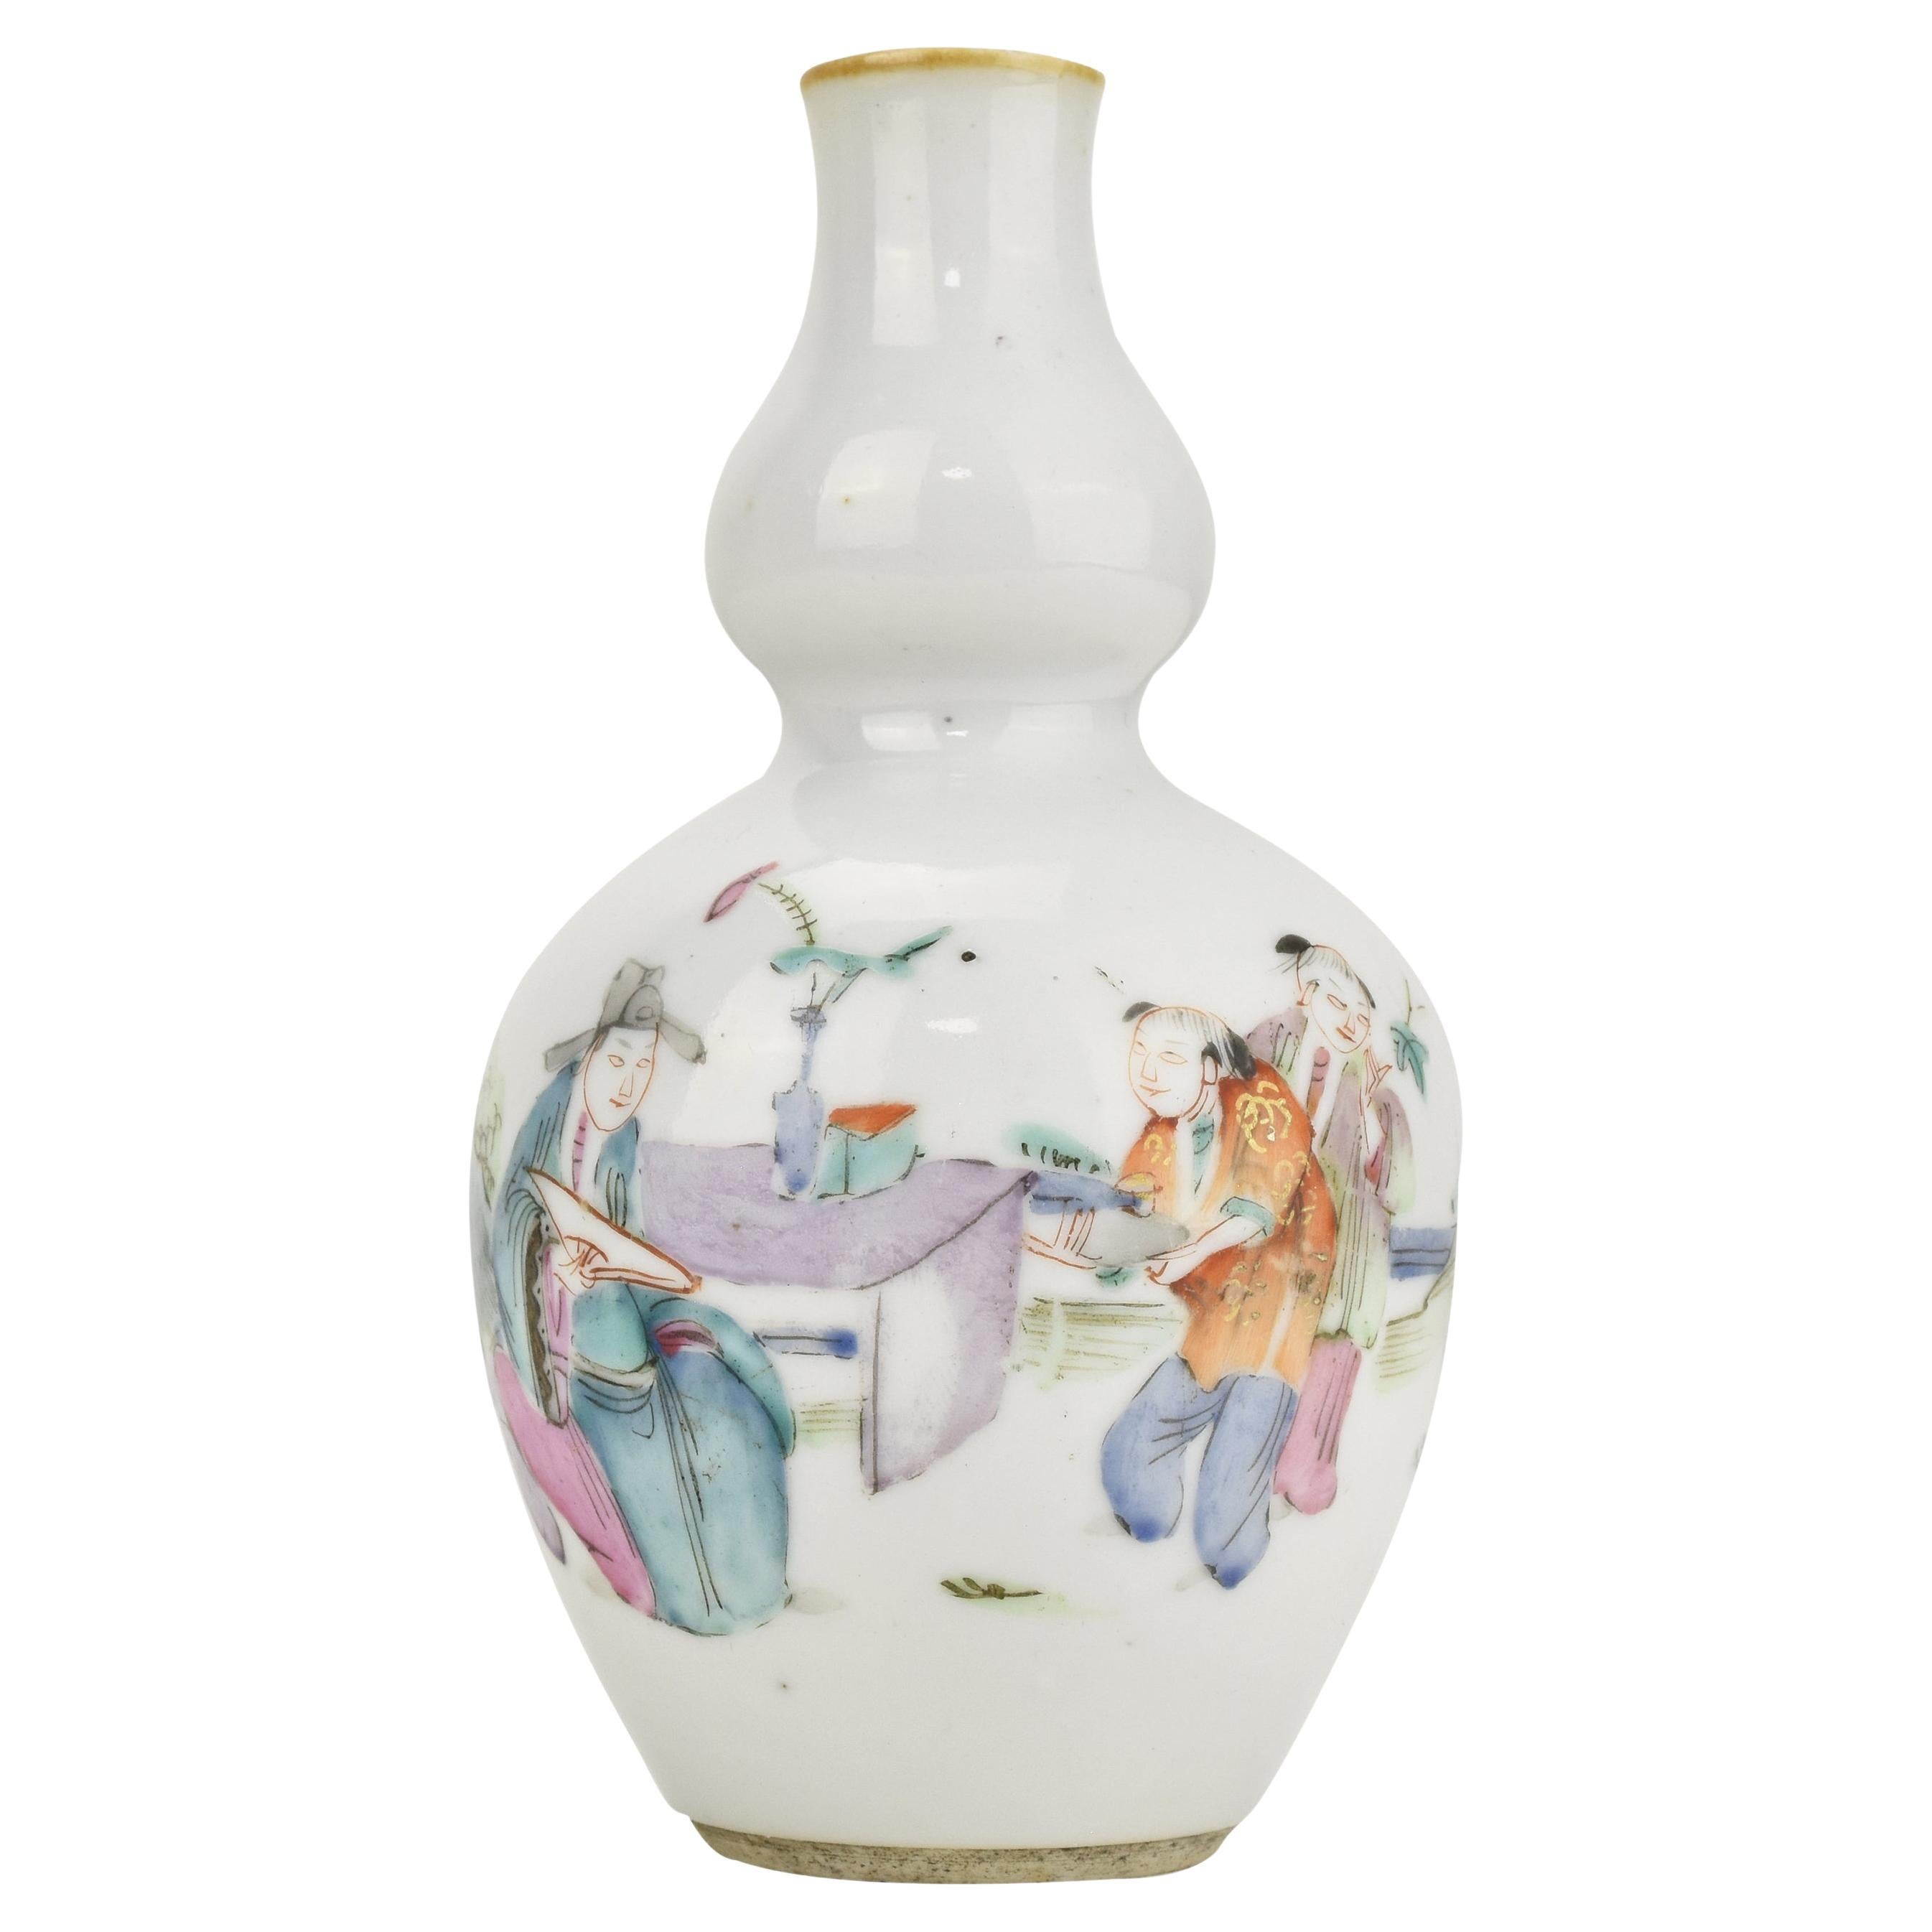 Antique Chinese Porcelain Famille Rose Vase Qing Dynasty 19th Century